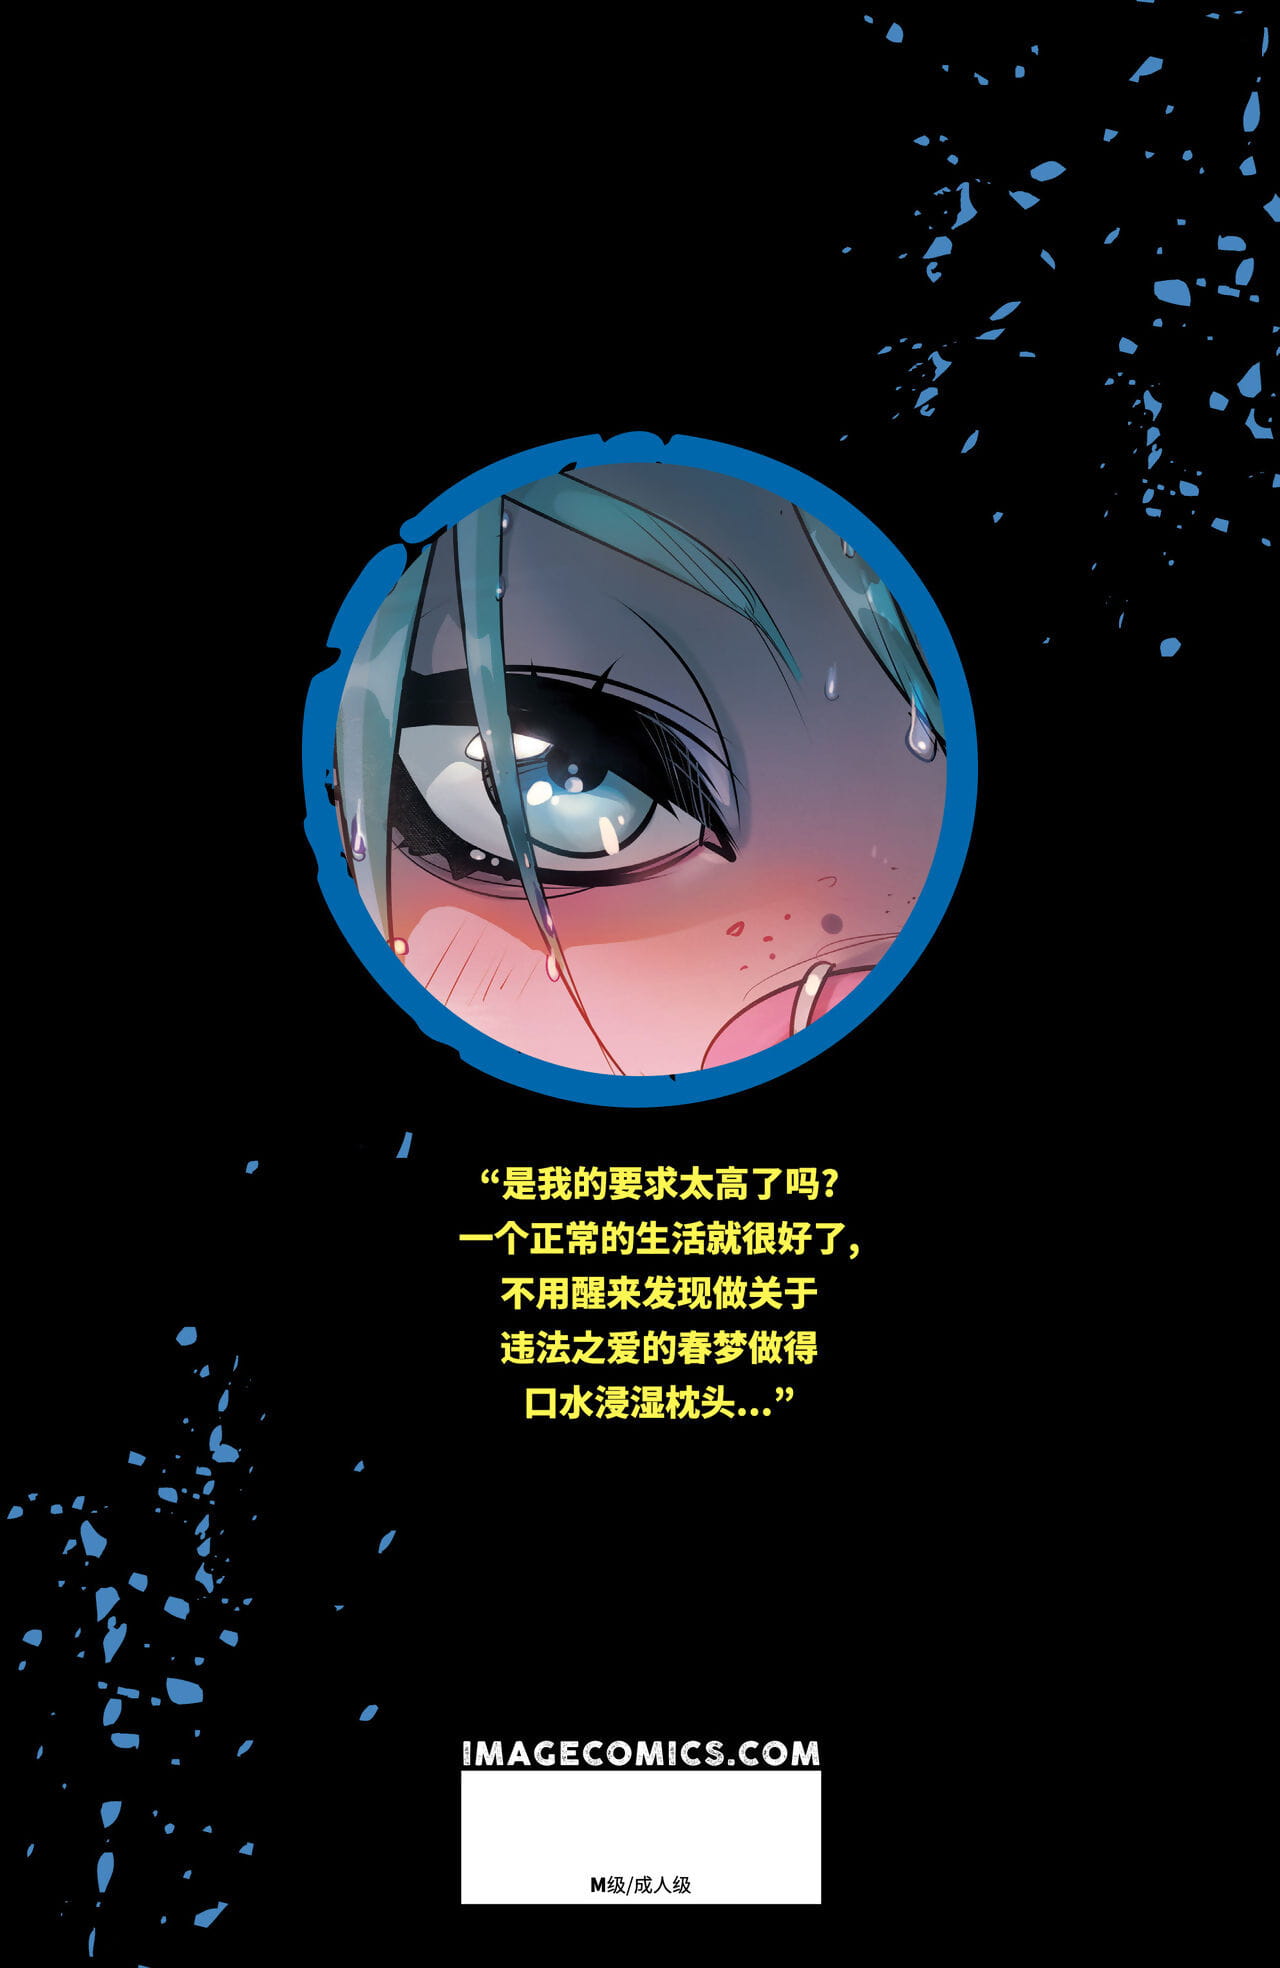 Unnatural - 反自然 - Issue 1 page 1